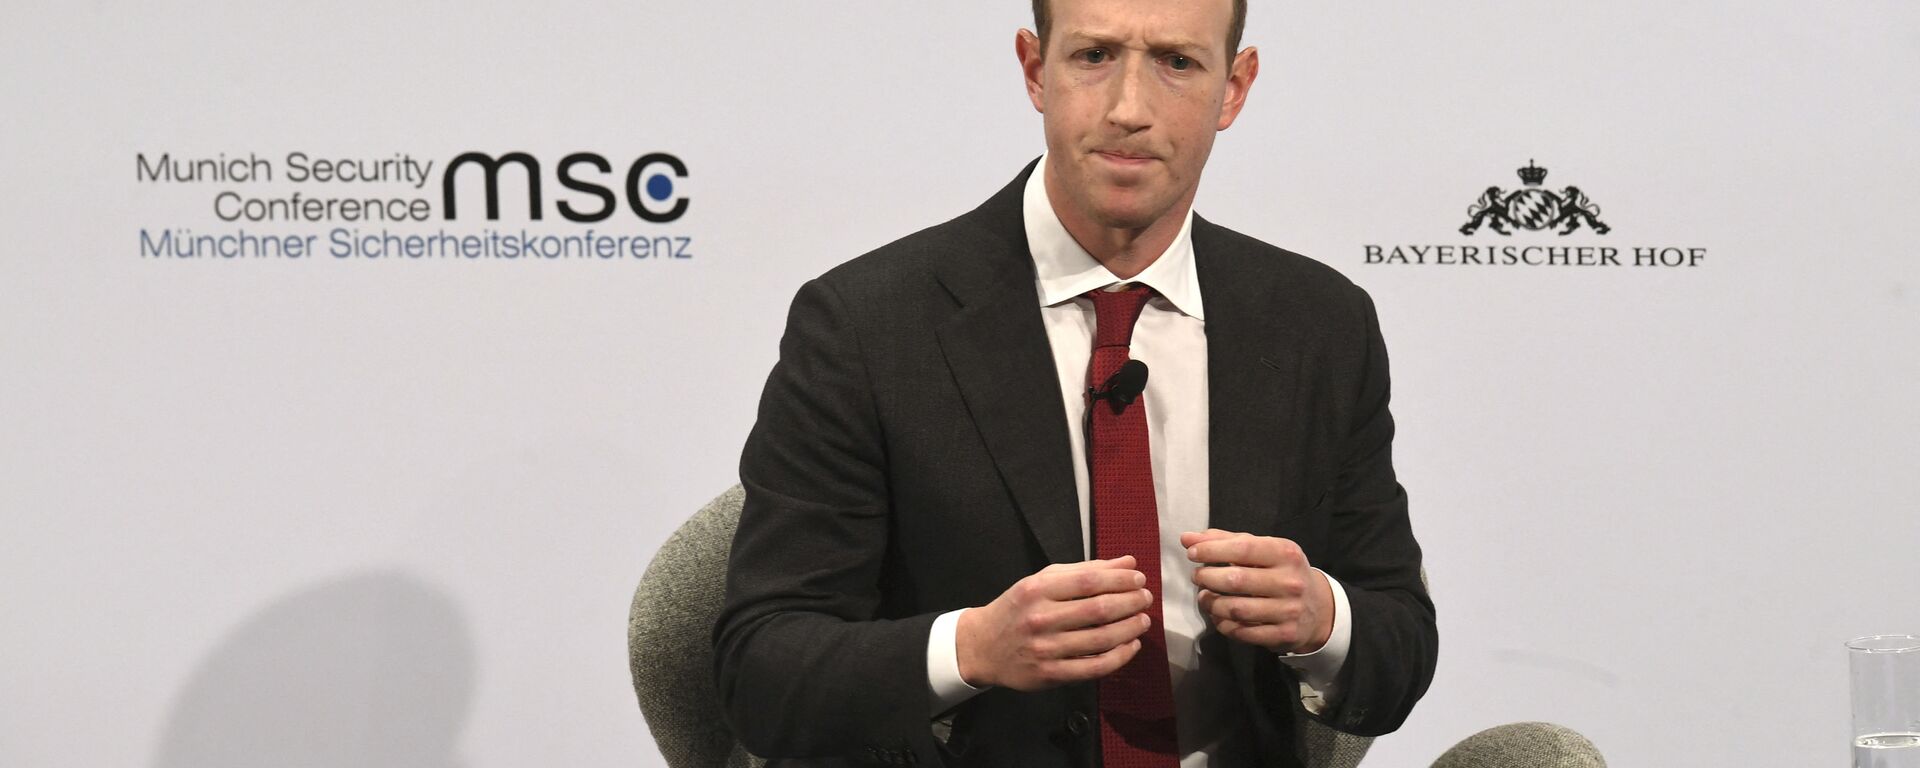 The founder and CEO of Facebook Mark Zuckerberg speaks during the 56th Munich Security Conference (MSC) in Munich, southern Germany, on February 15, 2020. - The 2020 edition of the Munich Security Conference (MSC) takes place from February 14 to 16, 2020.  - Sputnik International, 1920, 05.06.2021